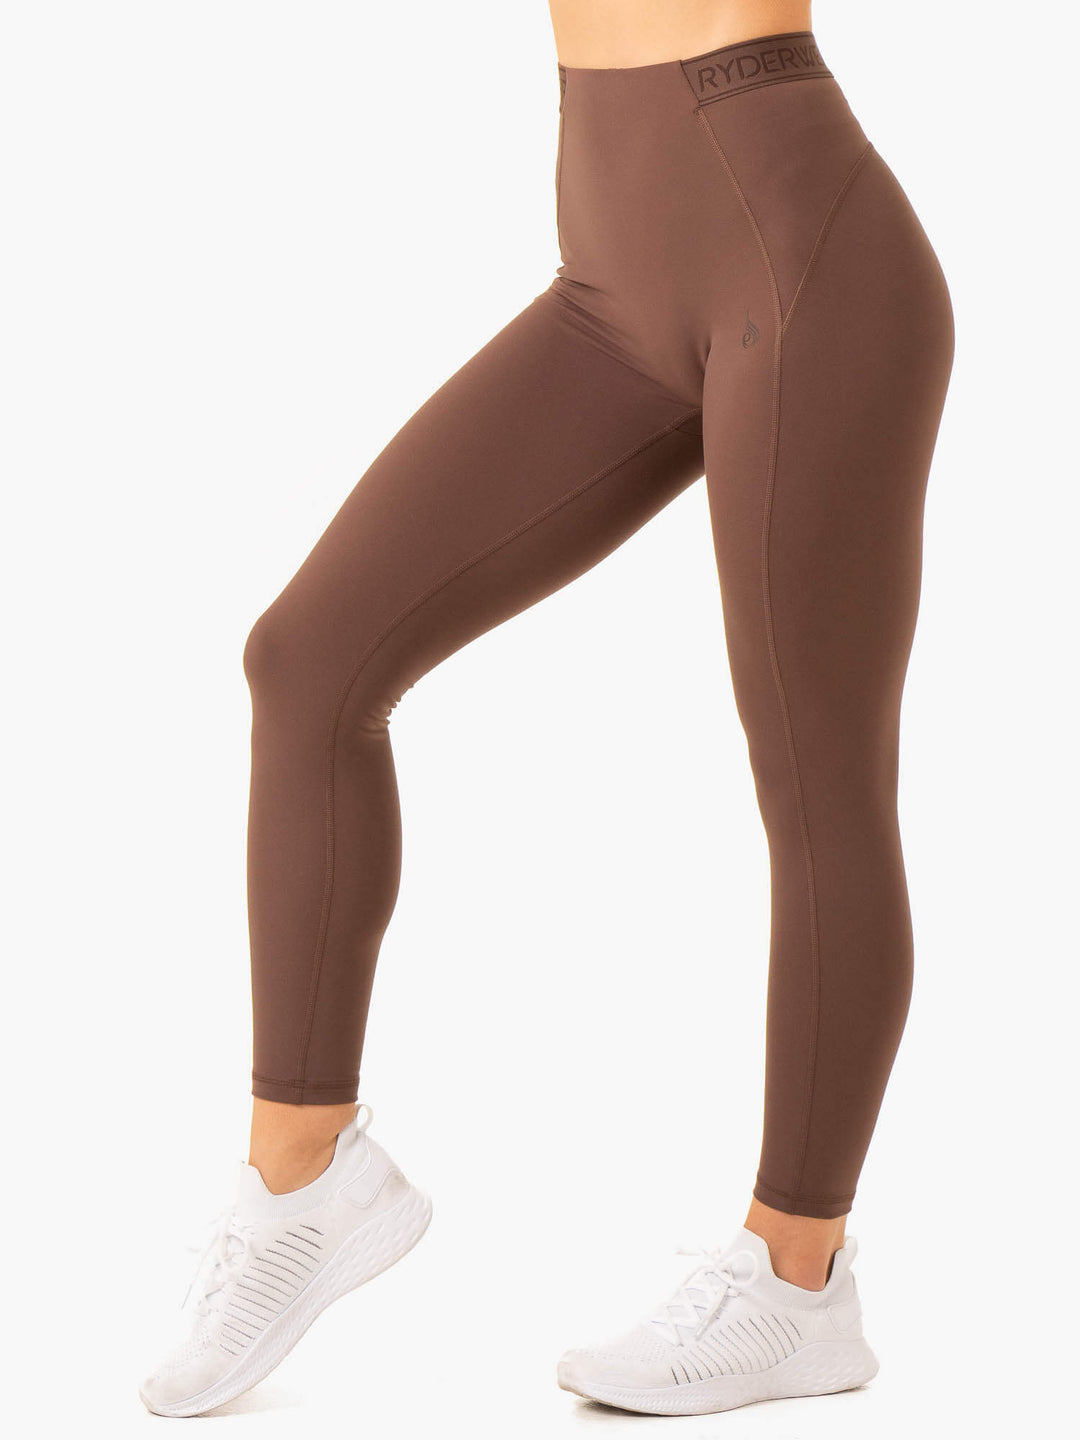 Ryderwear - Are you looking for the best women's scrunch bum